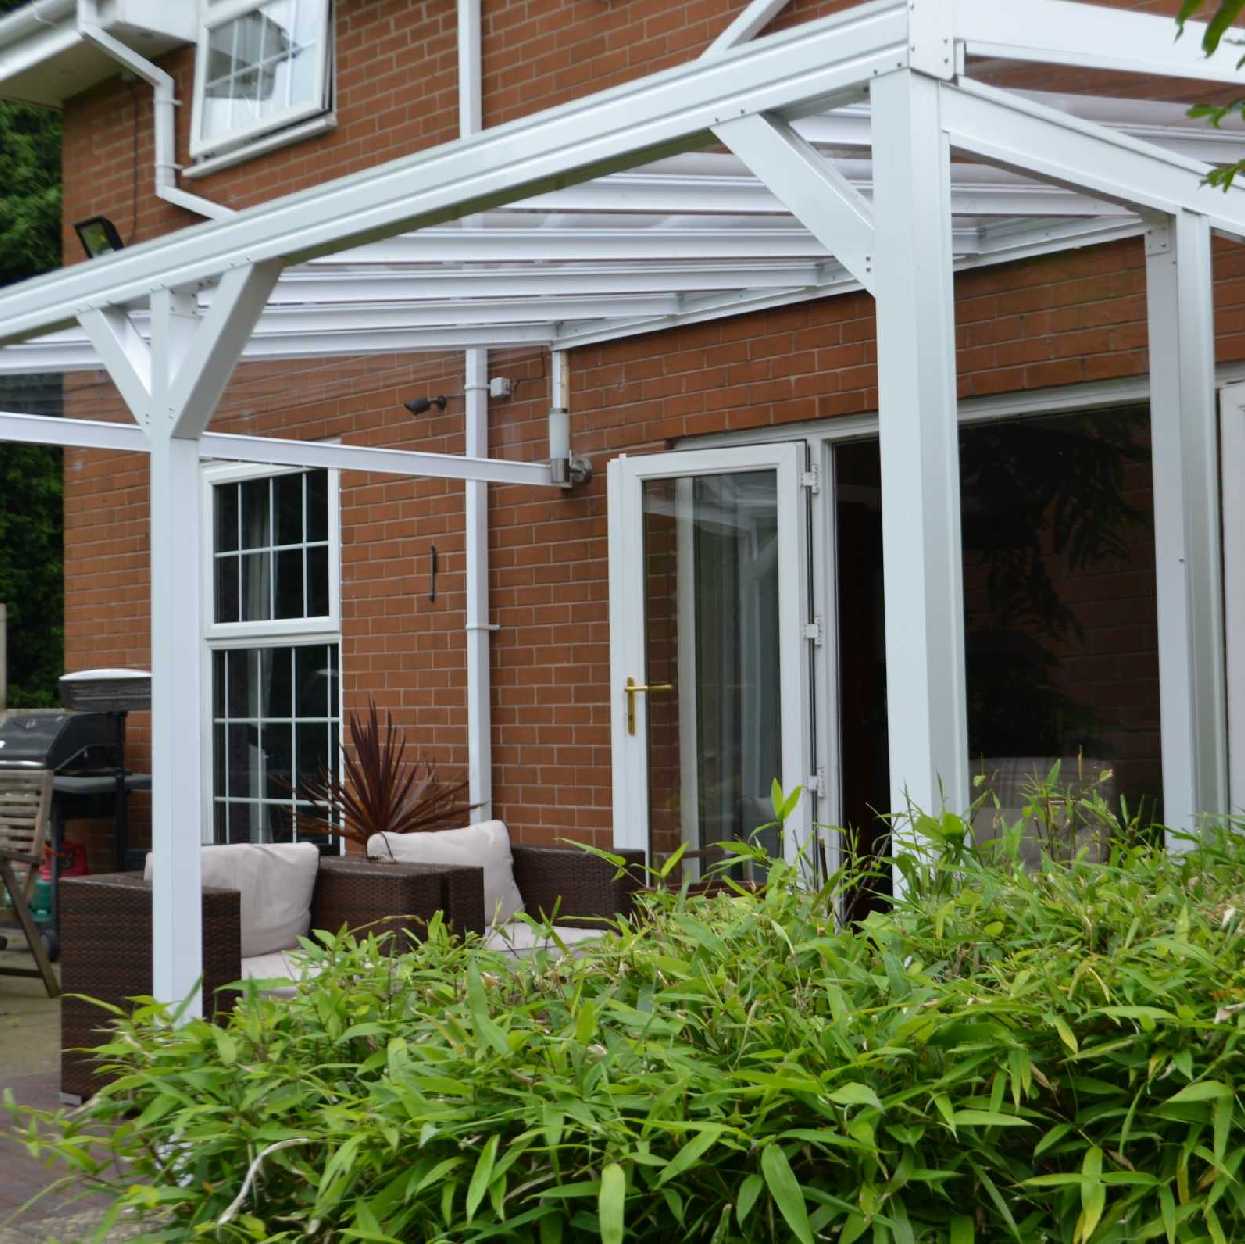 Omega Smart Lean-To Canopy, White with 6mm Glass Clear Plate Polycarbonate Glazing - 4.9m (W) x 3.0m (P), (3) Supporting Posts from Omega Build